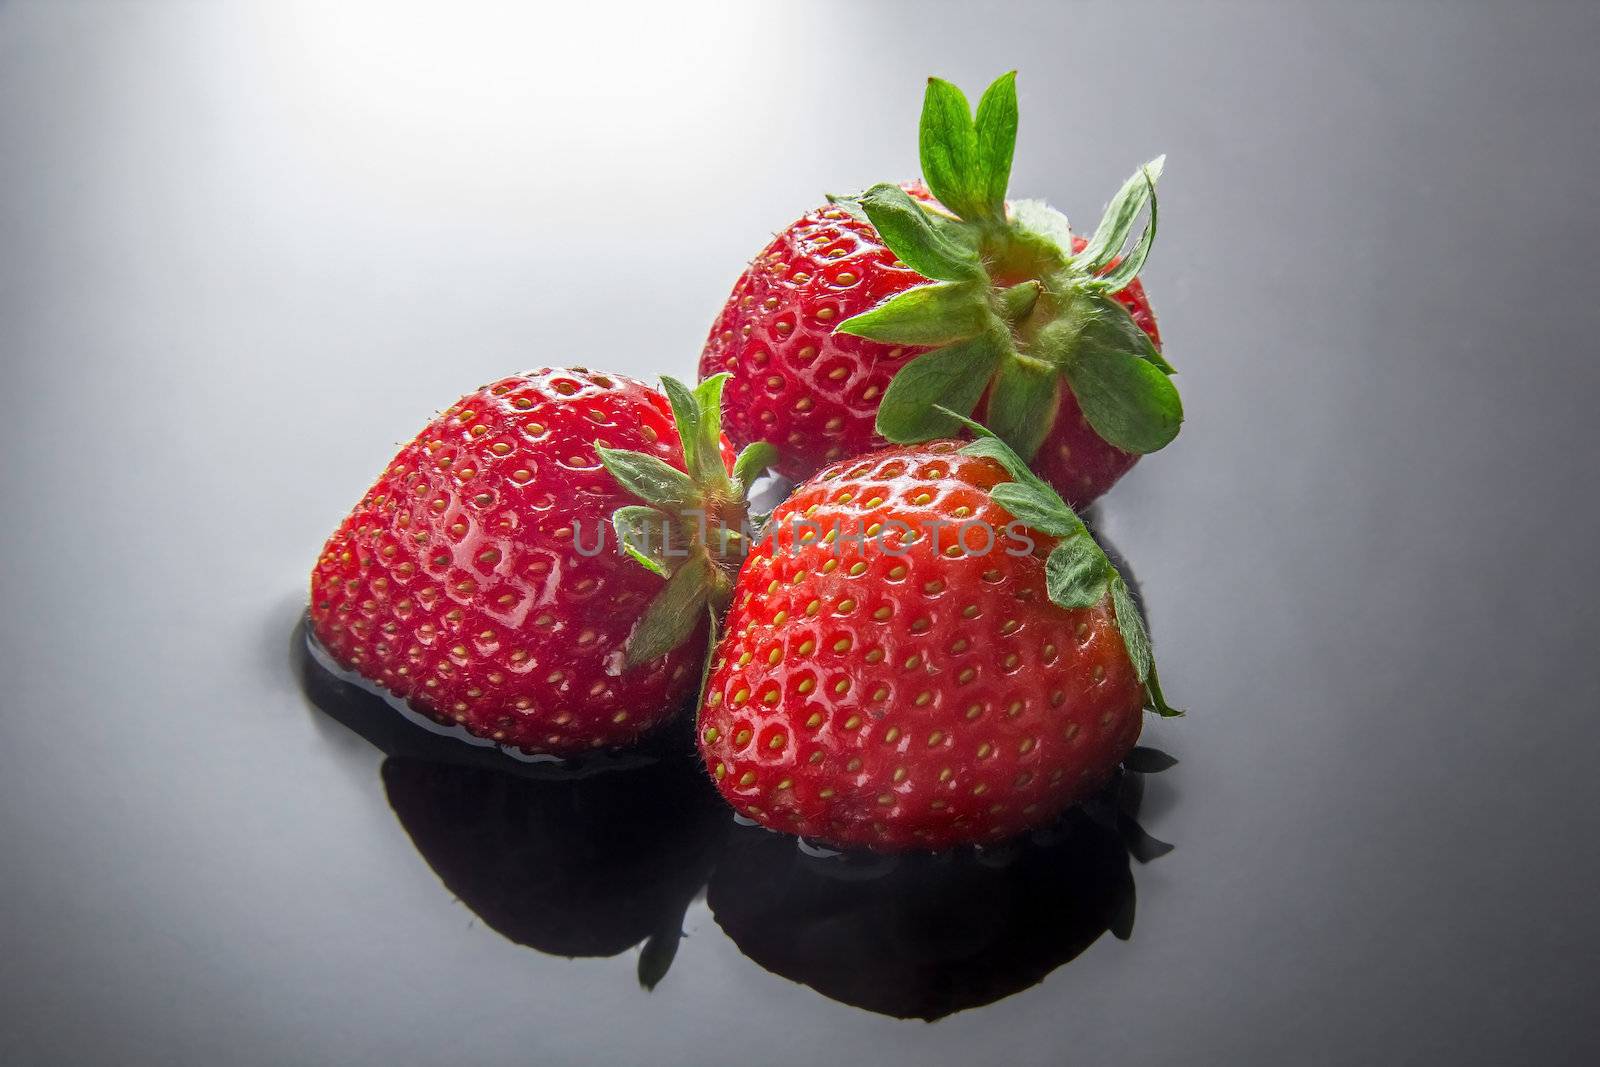 Strawberries on water by dynamicfoto